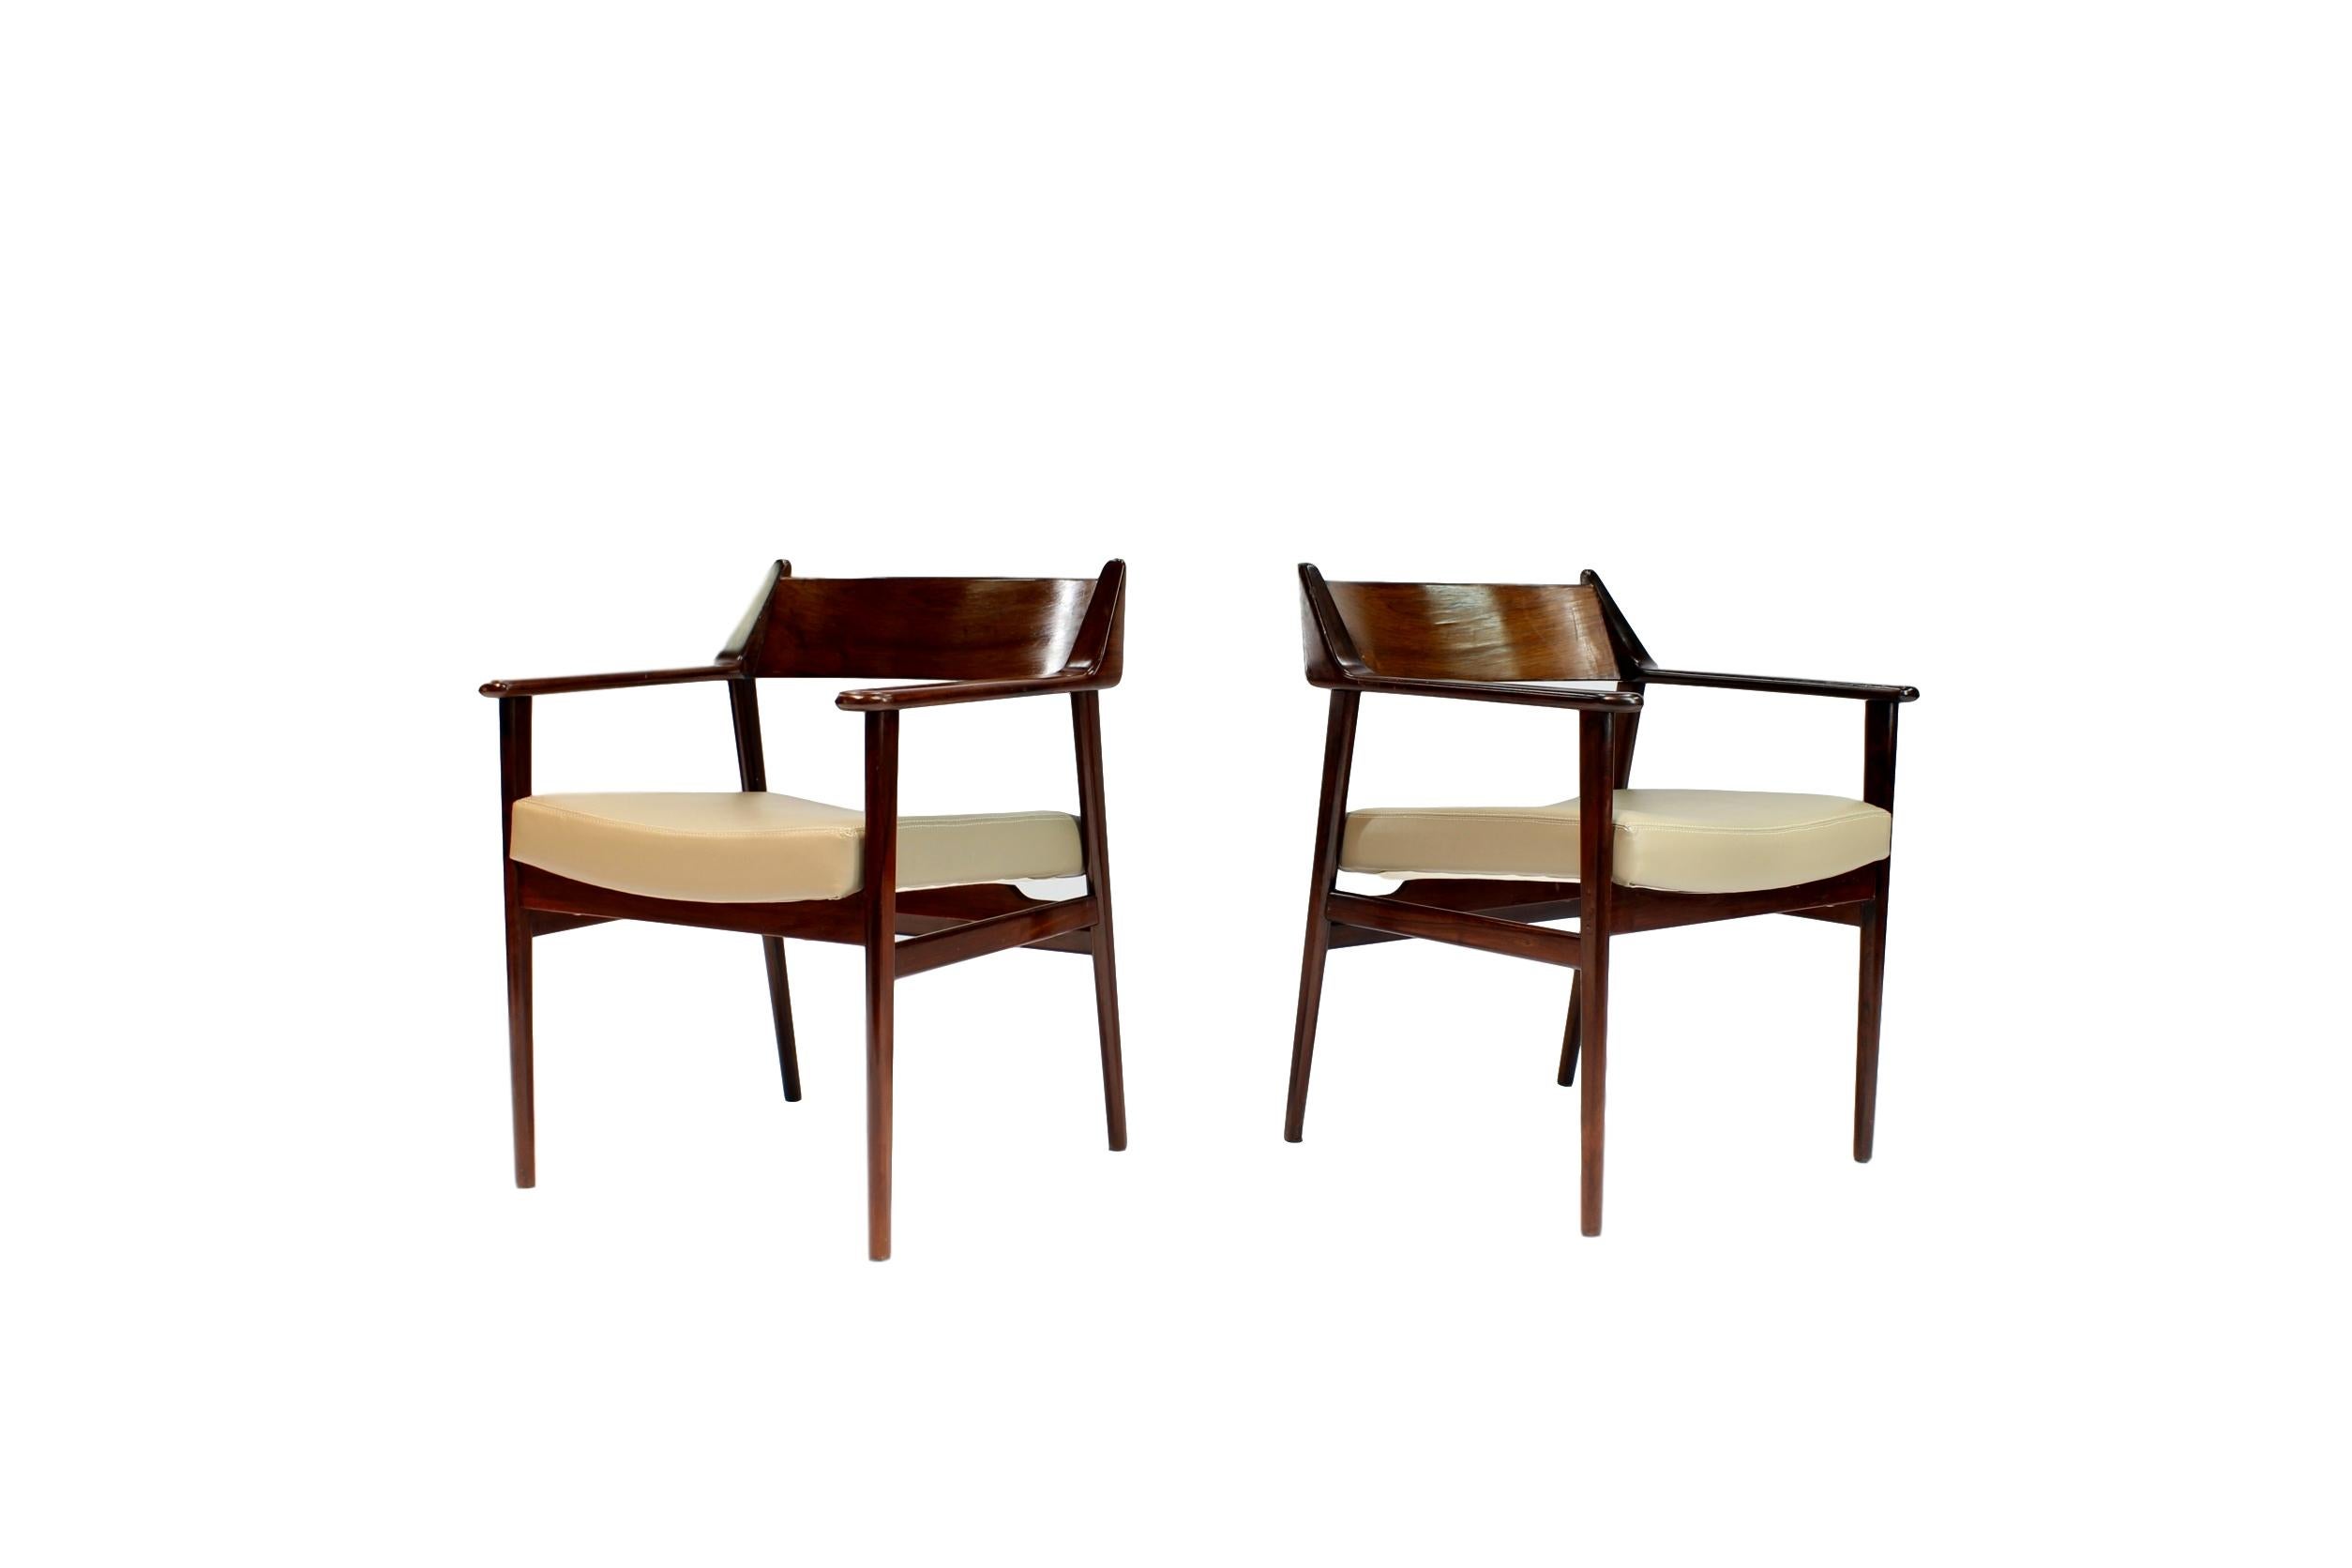 A pair of 'Poltrona Bicuda' chairs, circa 1960
Solid rosewood with leather seats.

P.S. Colors may vary.
       Buyer Pays Shipping Cost.